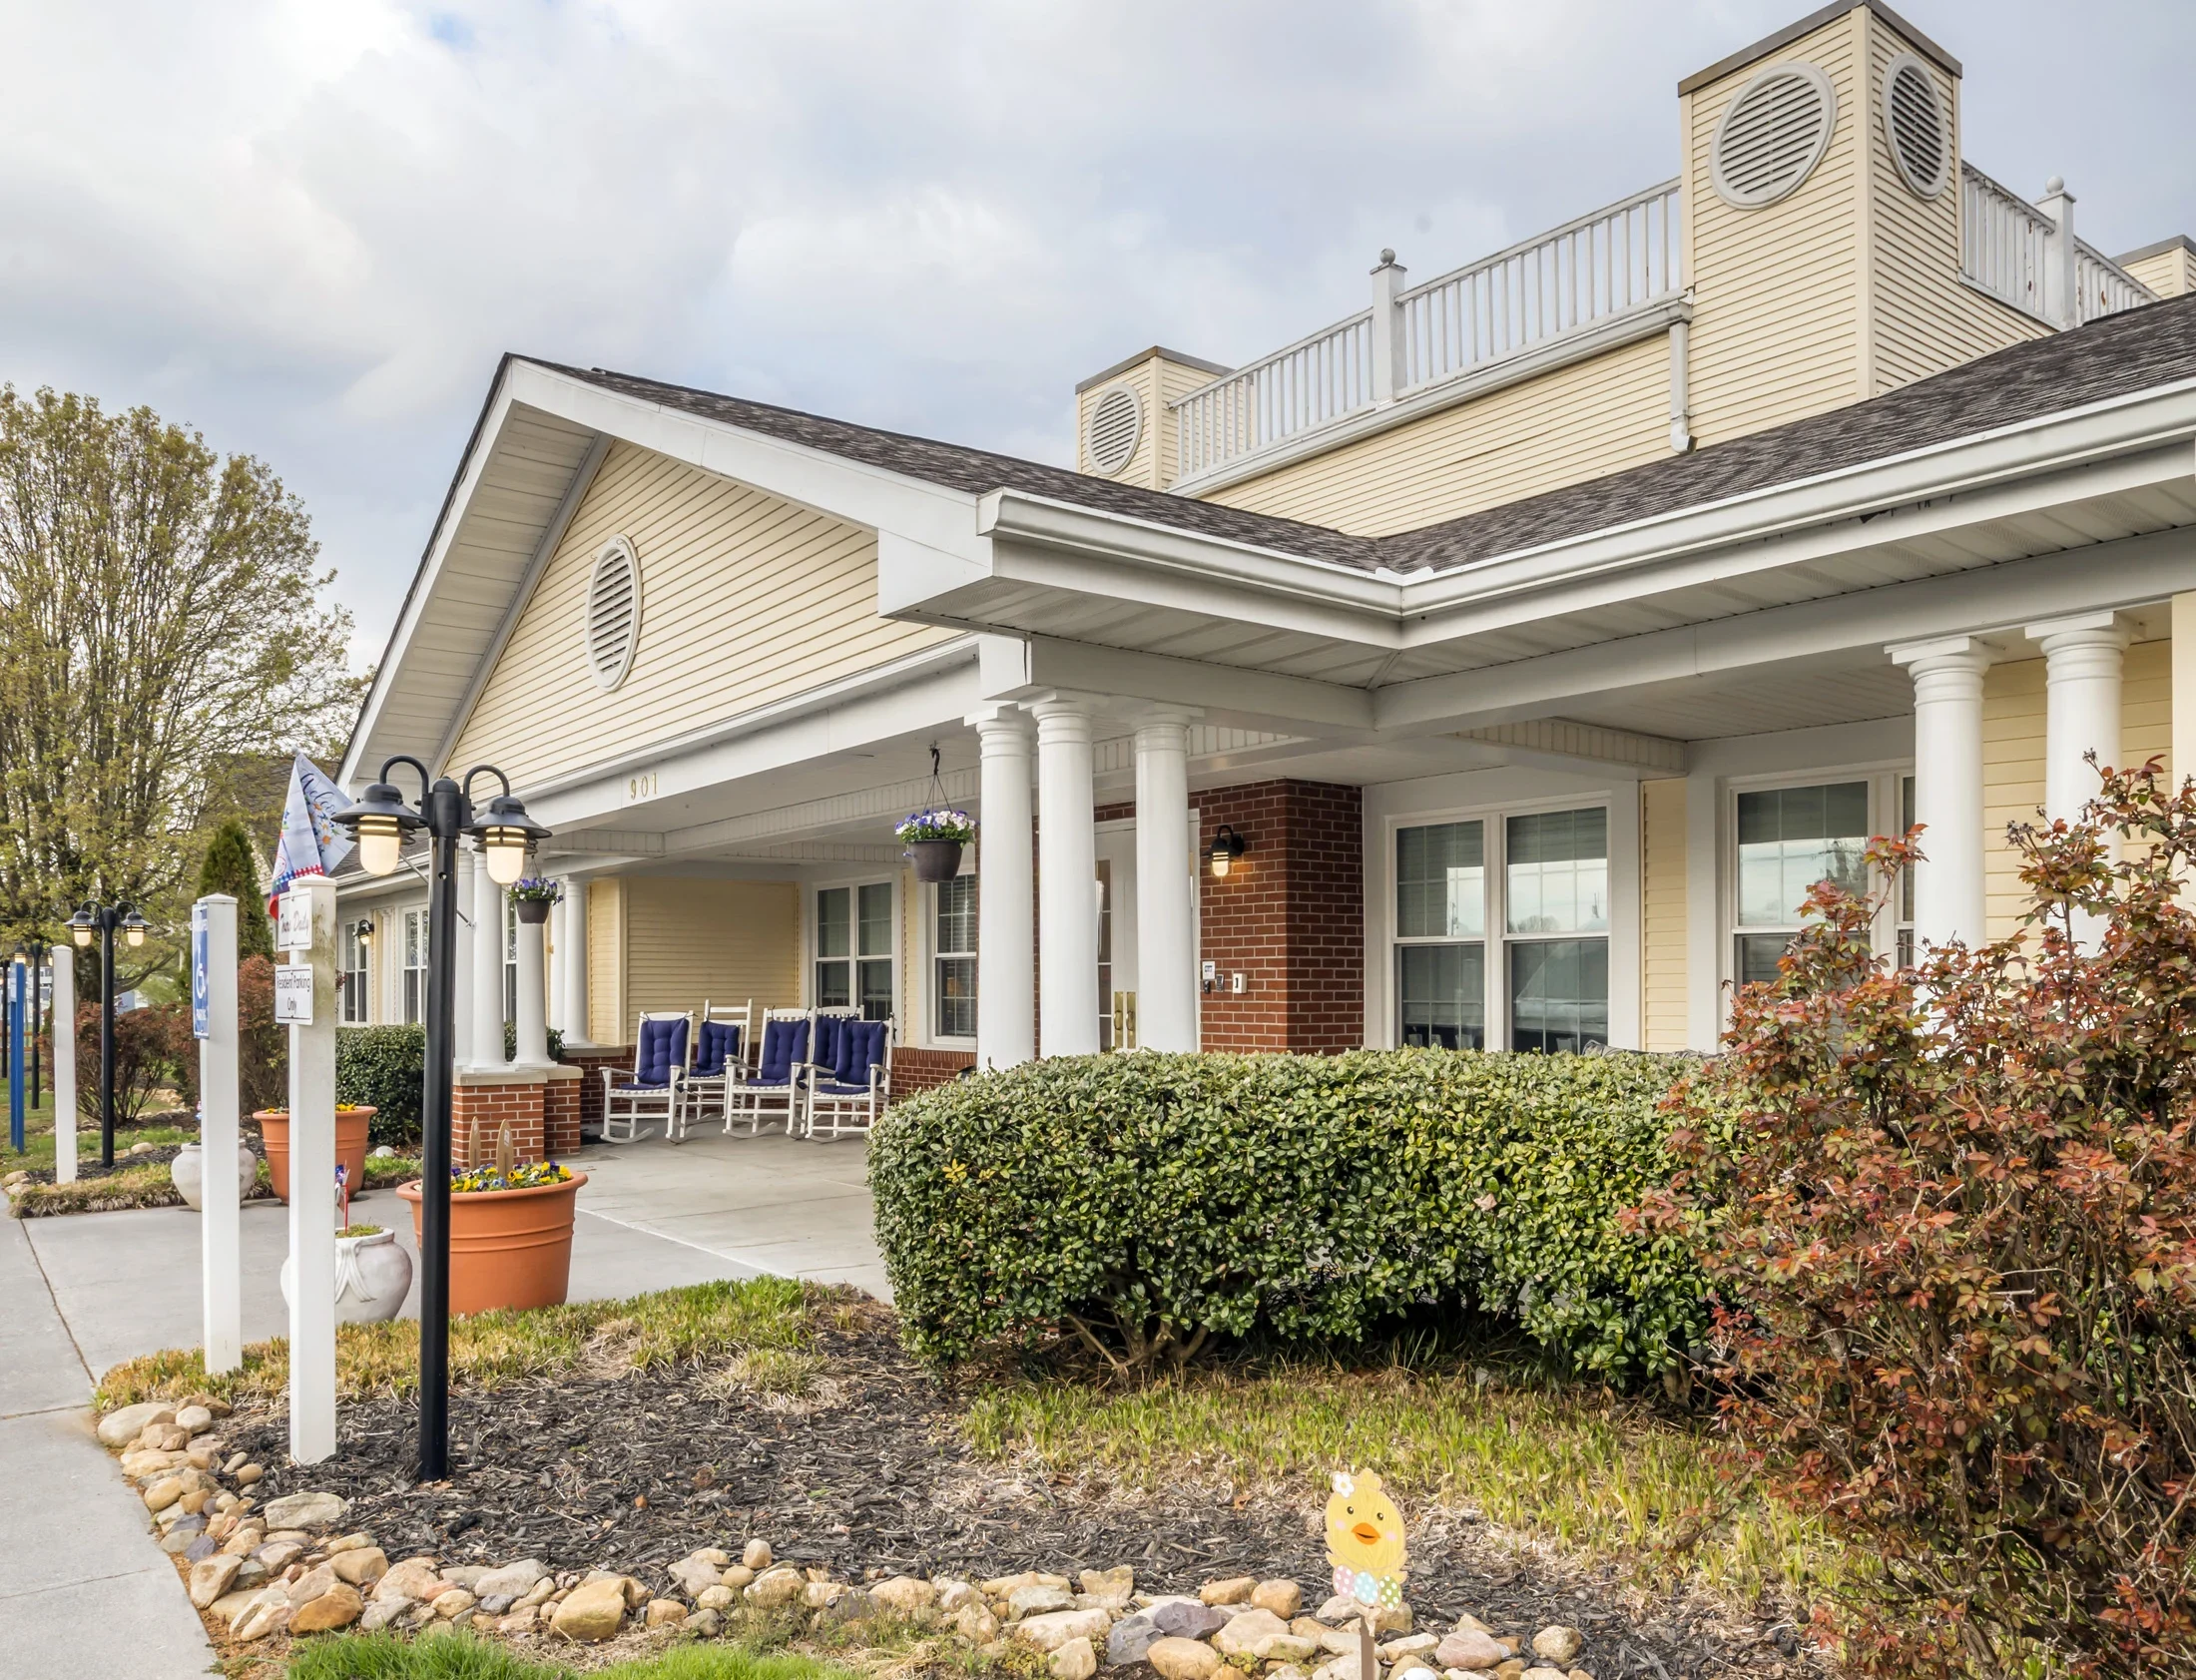 Exterior of American House Kingsport, an assisted living facility in Kingsport, TN